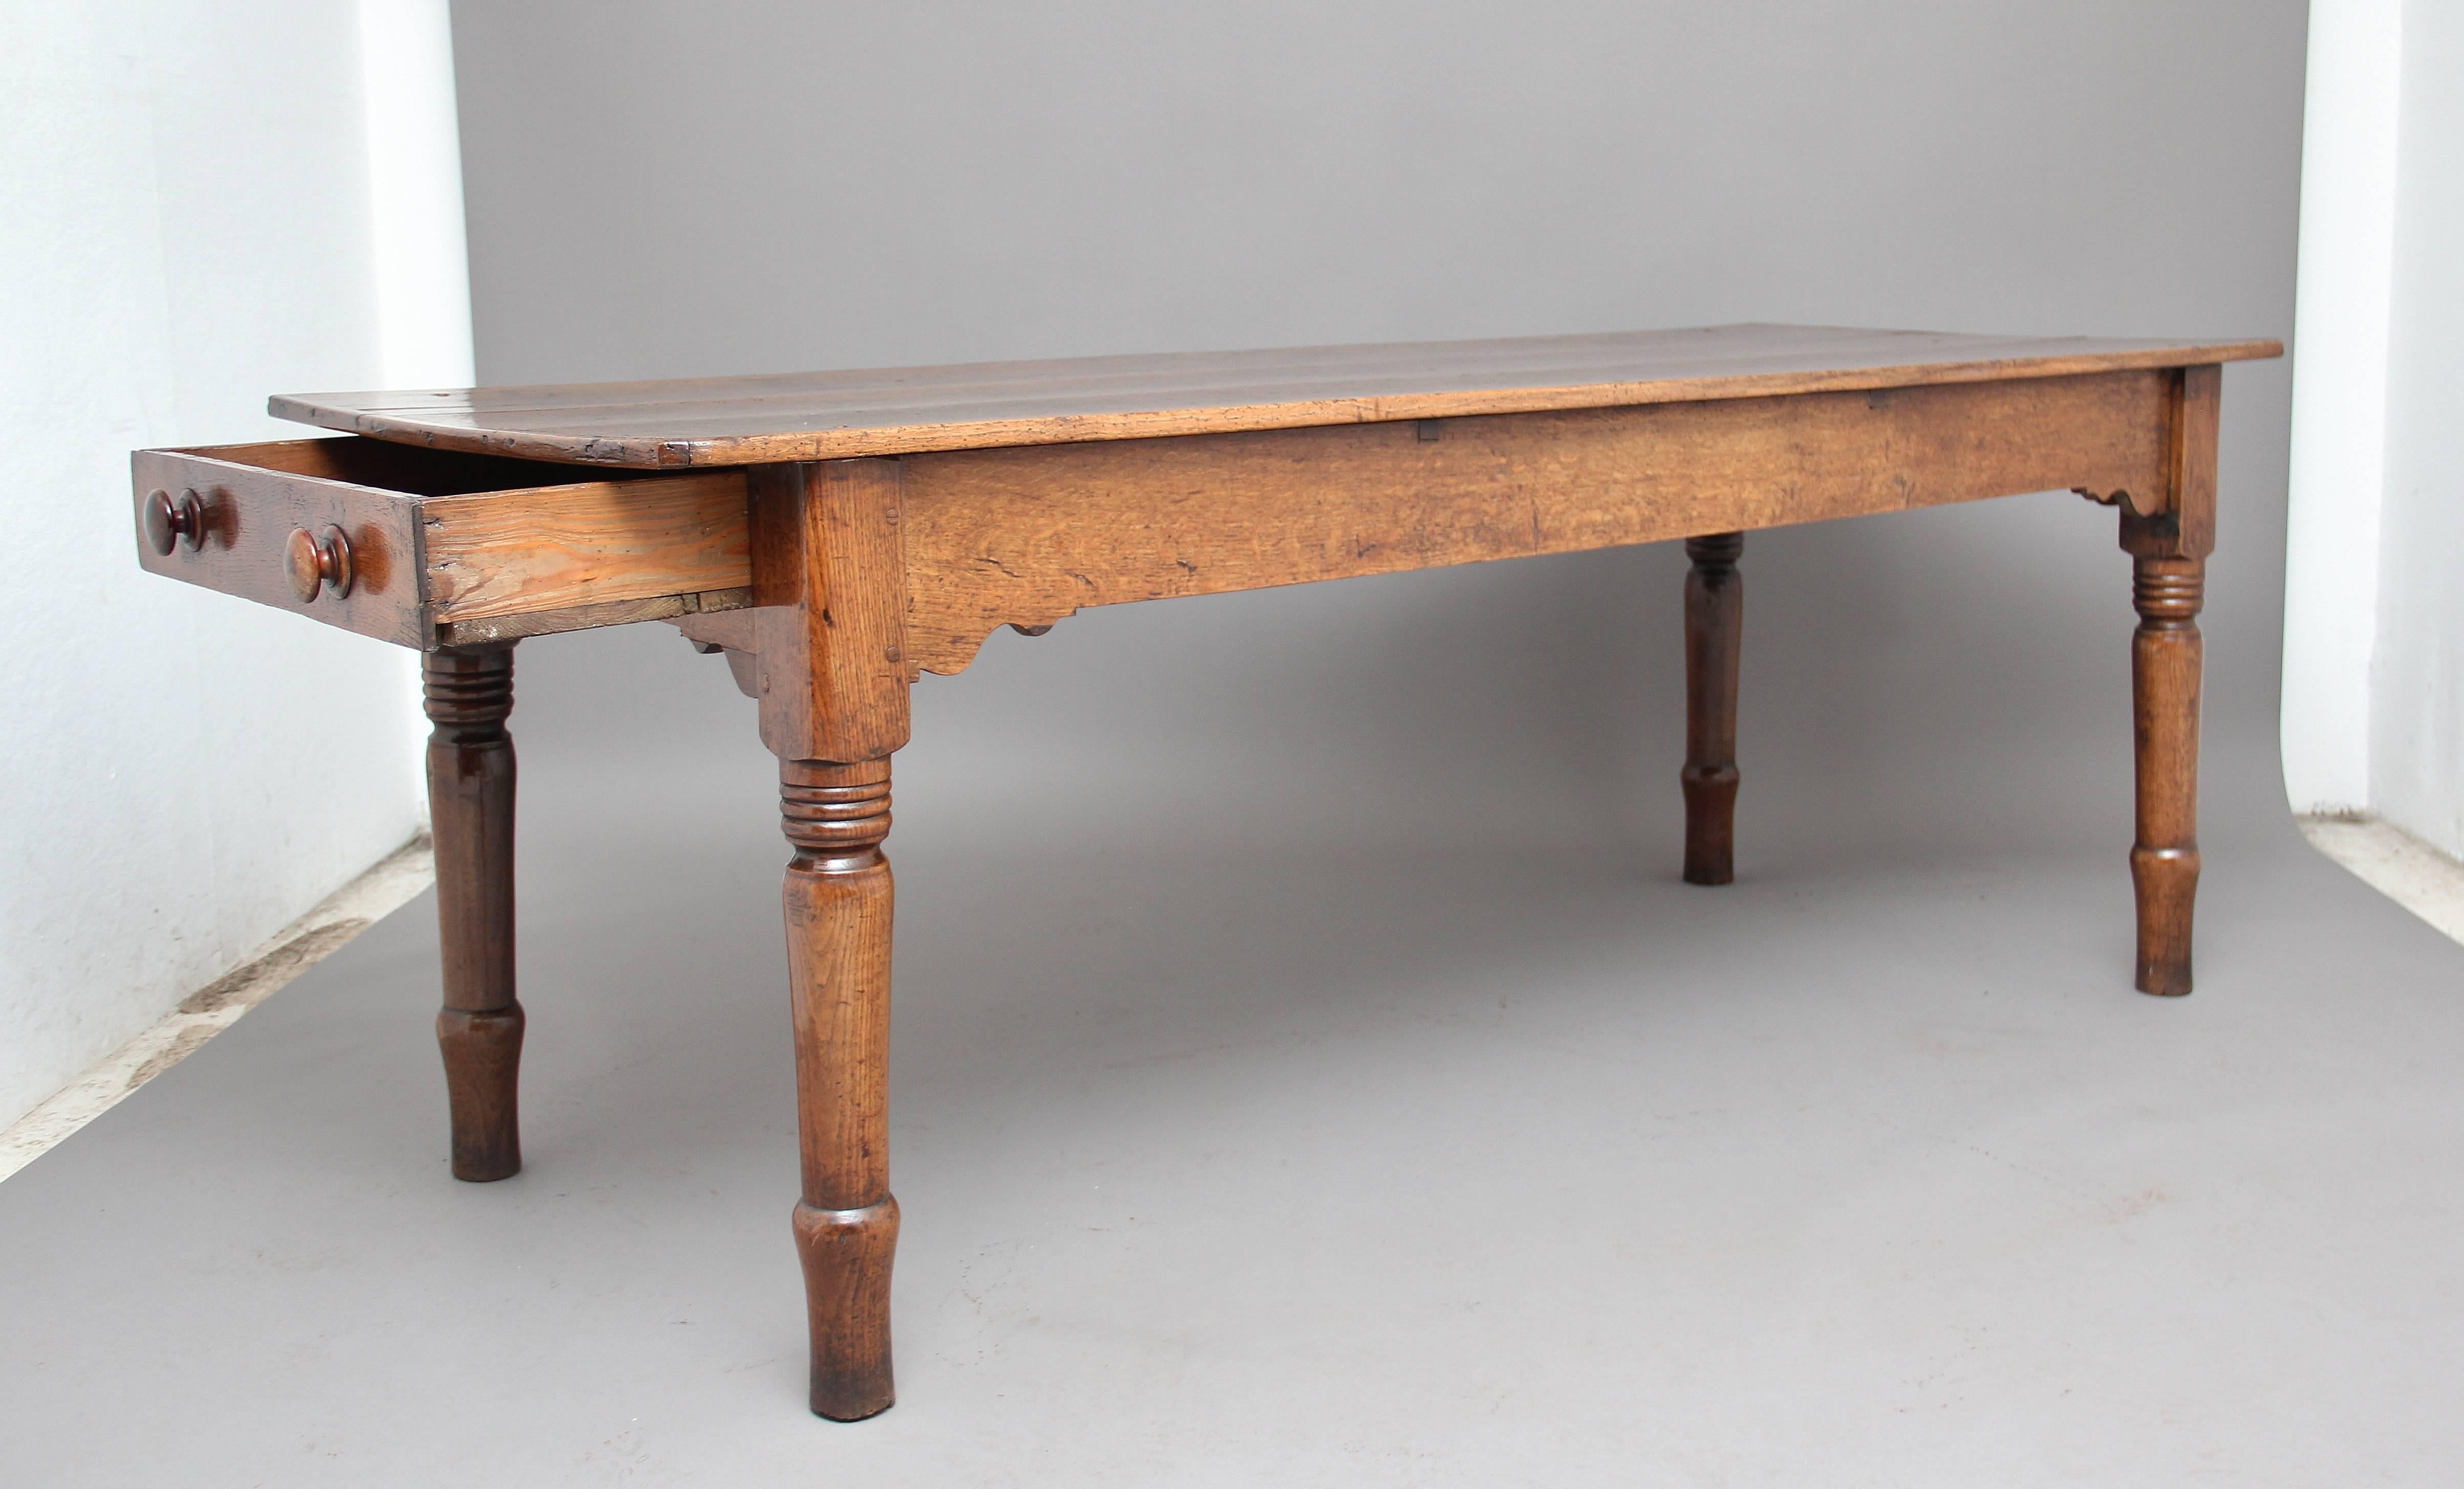 A superb quality early 19th century oak farmhouse table, the three plank top having a wonderful patina above a frieze which is shaped at the corners, with a drawer at one end of the table with original turned wooden knobs, standing on nice bold